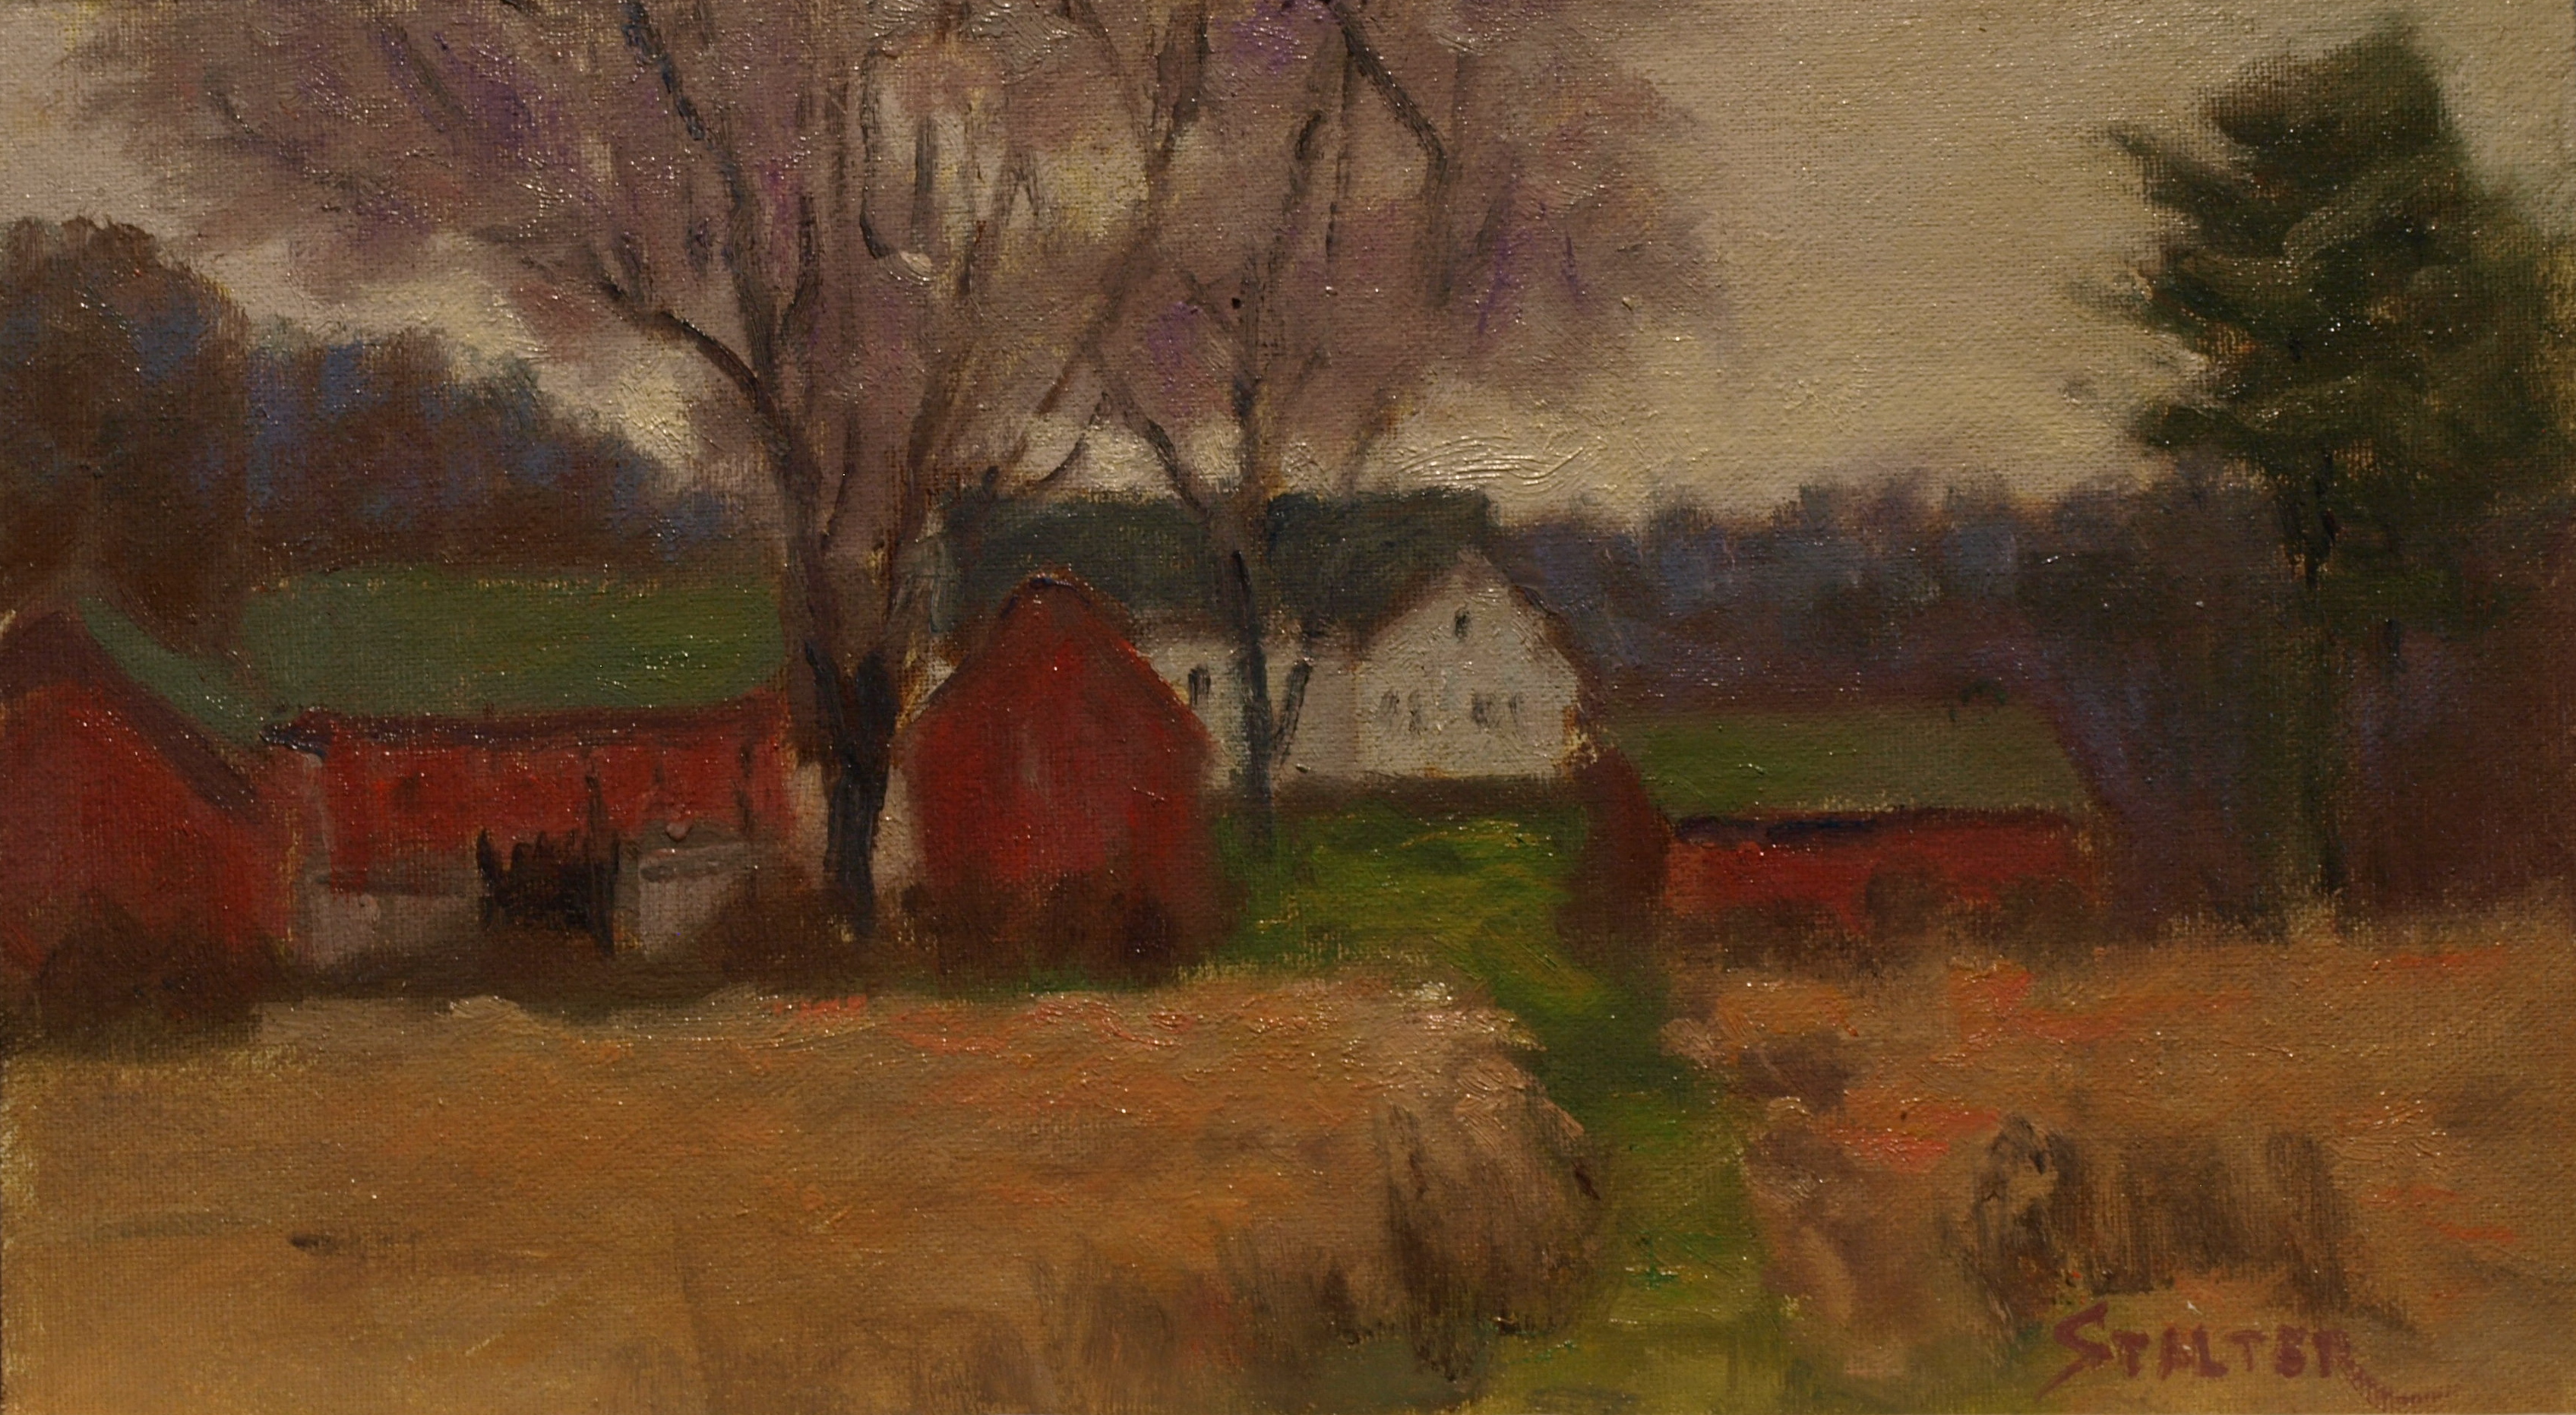 Red Barns in Autumn, Oil on Canvas on Panel, 8 x 14 Inches, by Richard Stalter, $220